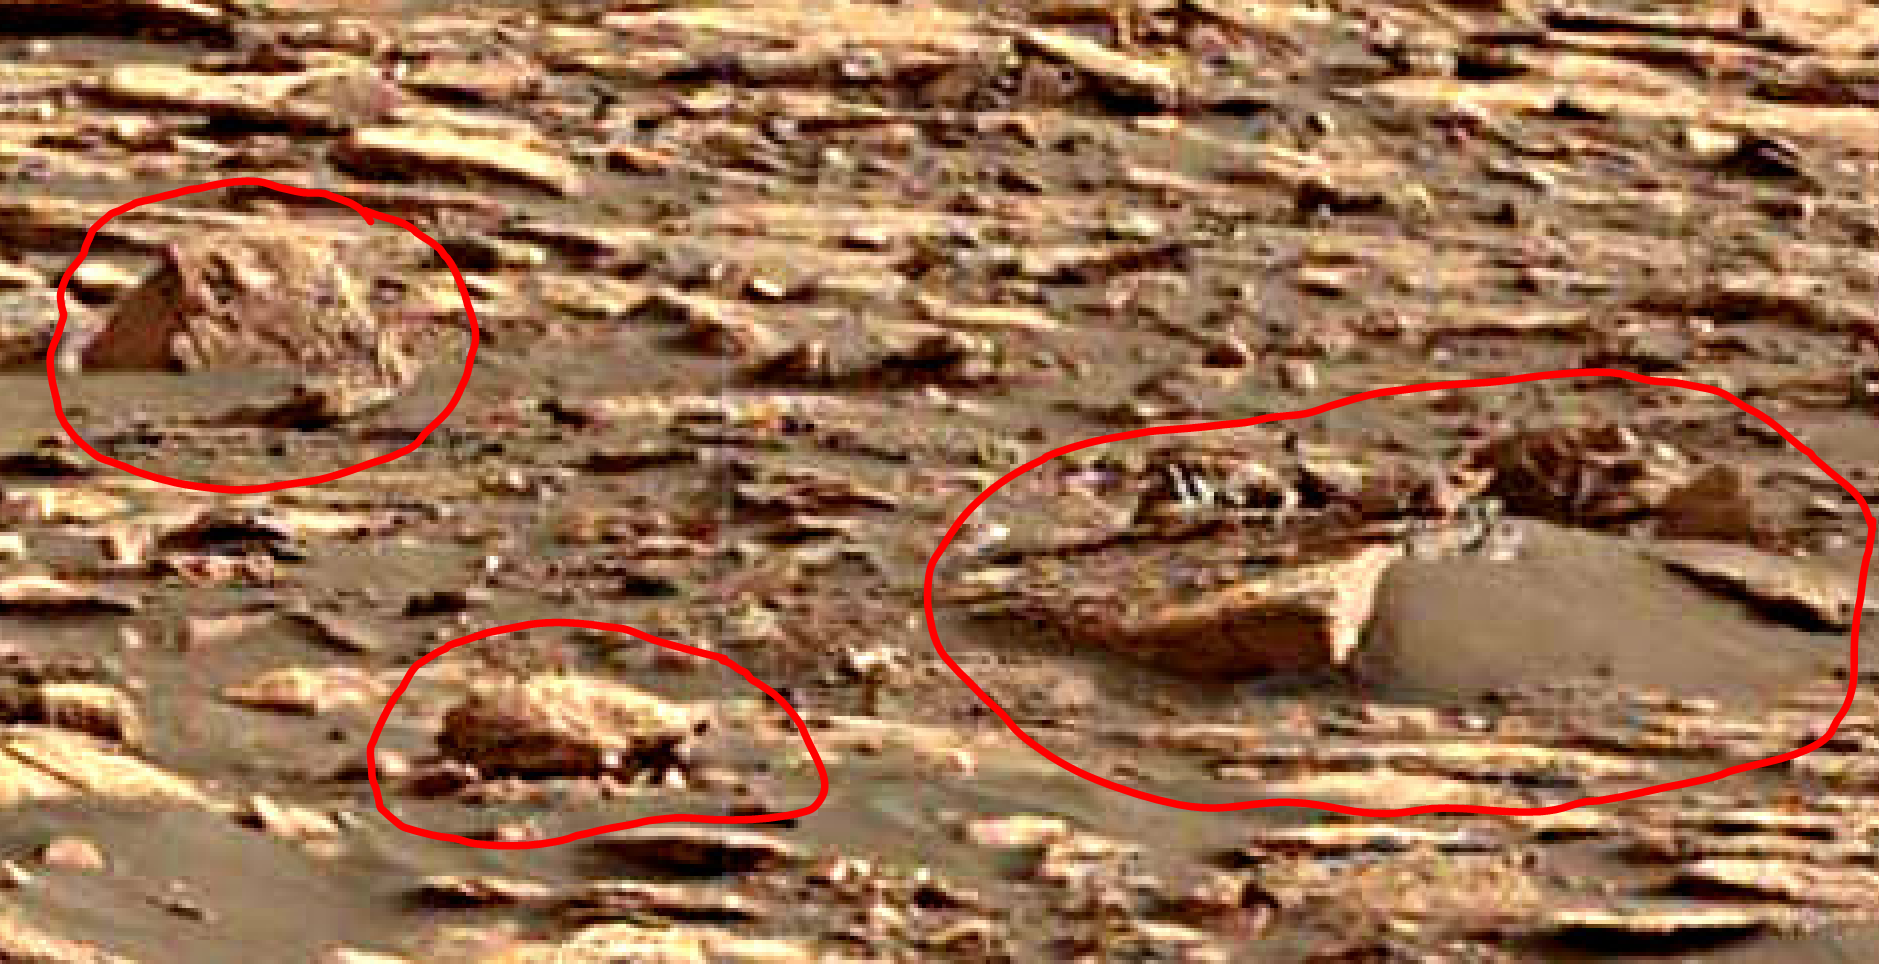 mars-sol-1512-anomaly-artifacts-9-was-life-on-mars